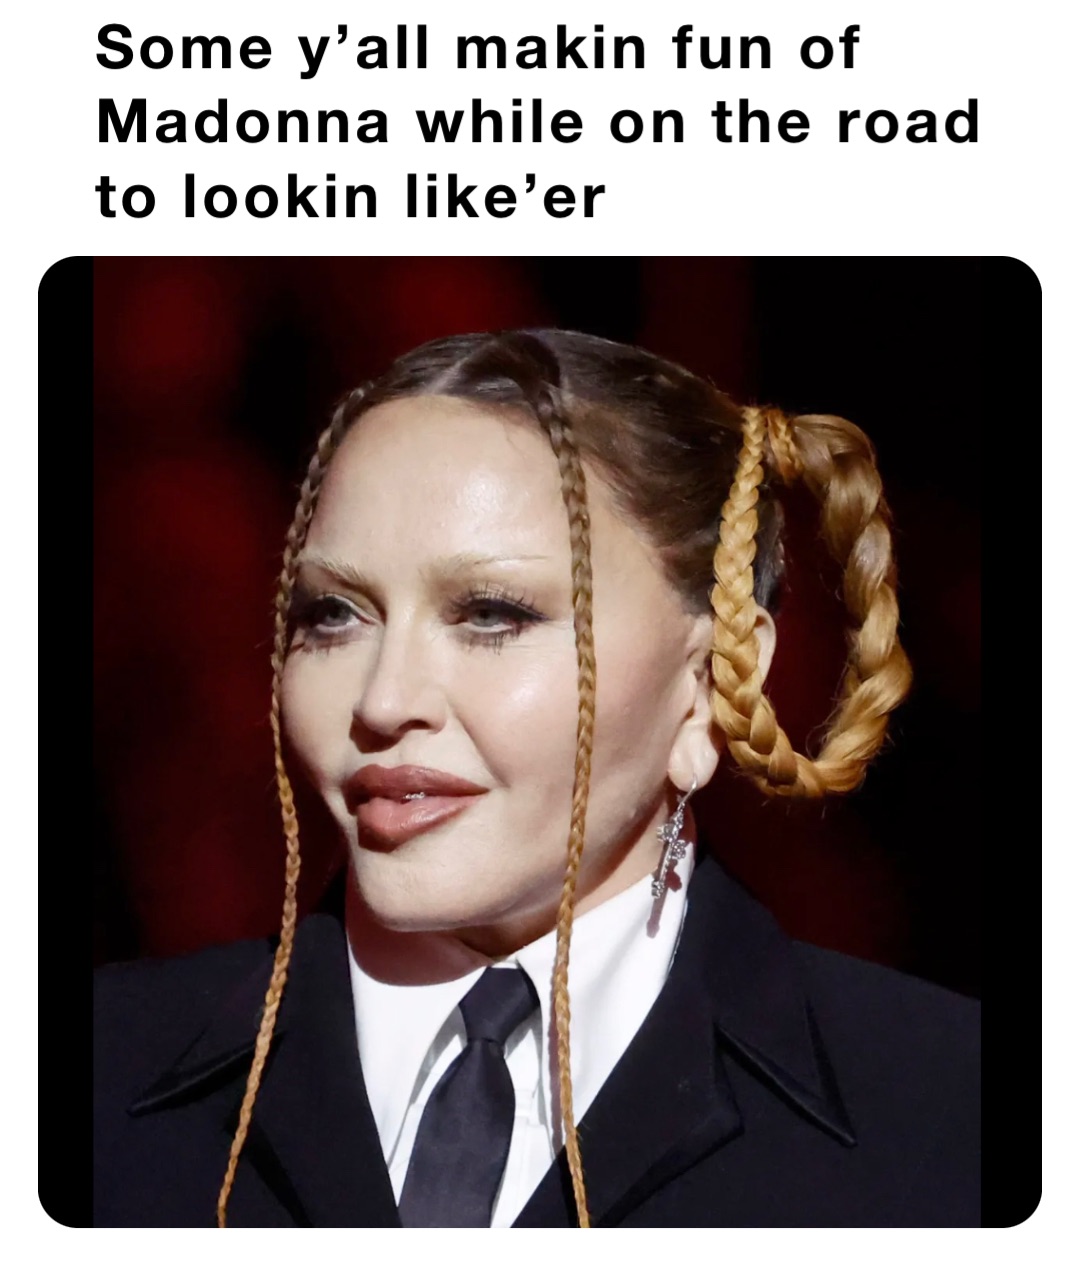 Some y’all makin fun of Madonna while on the road to lookin like’er